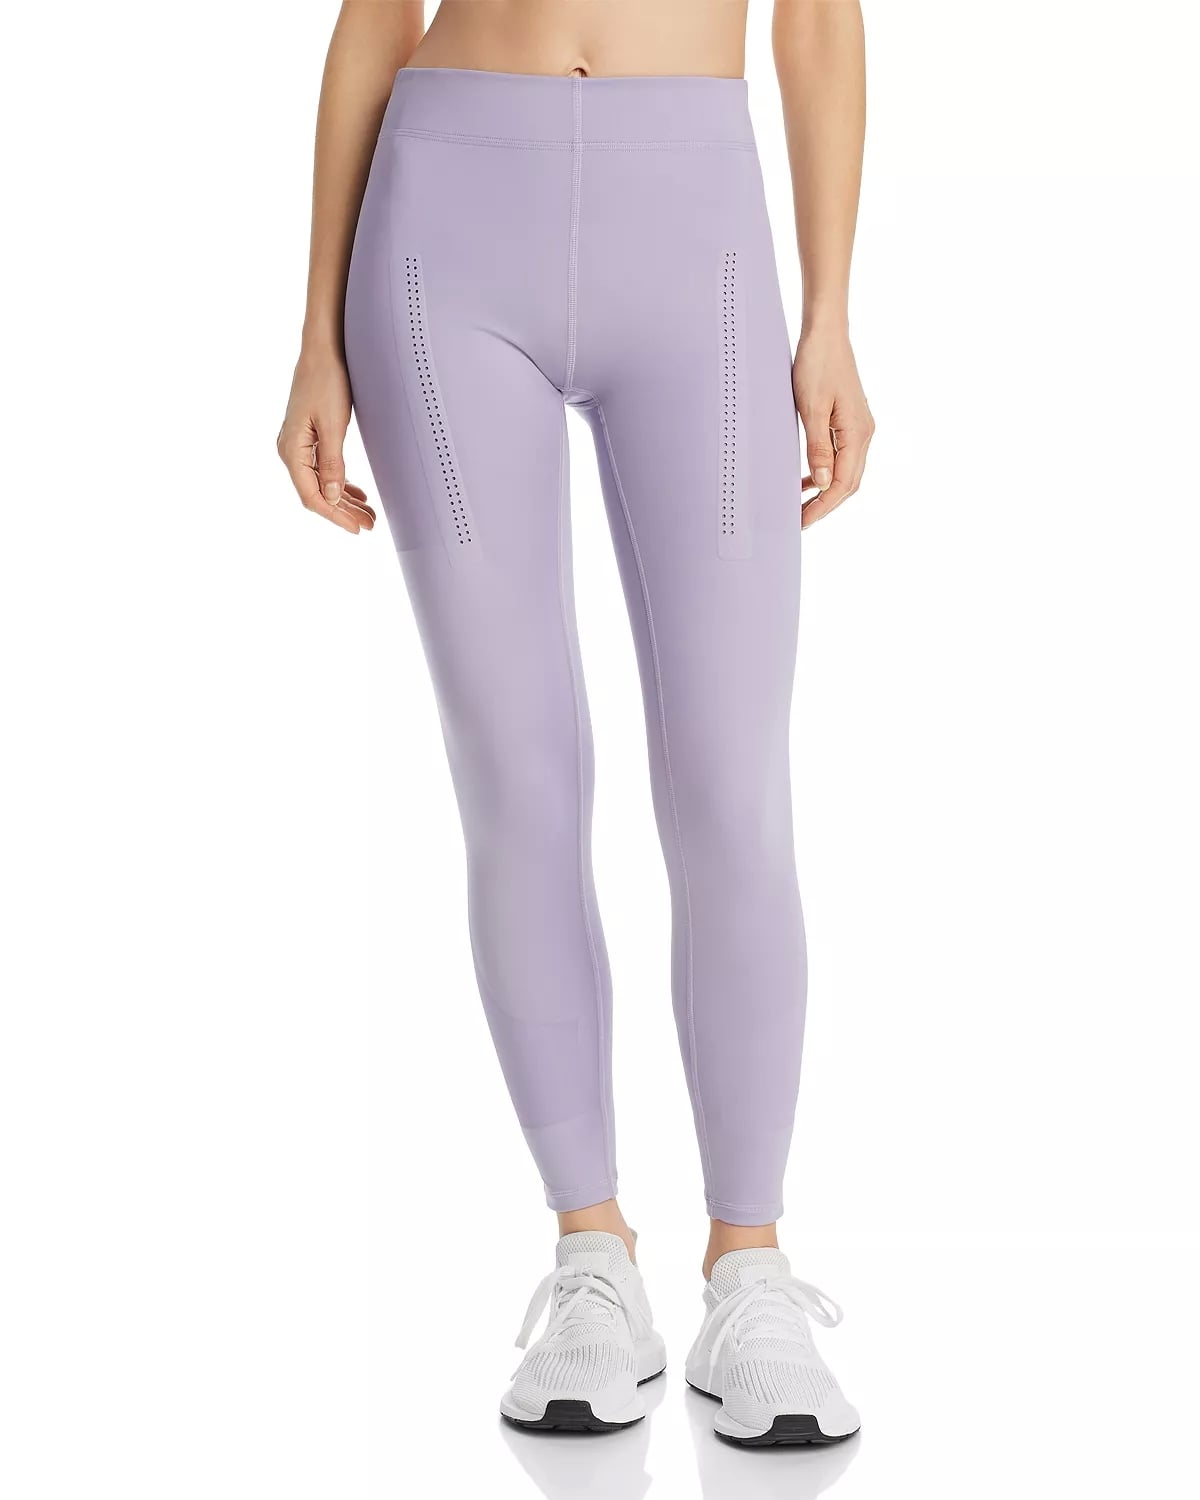 Adidas by Stella McCartney Train Perforated Leggings | Hop Into Spring With Favorite Pastel-Colored Workout Gear | POPSUGAR 10